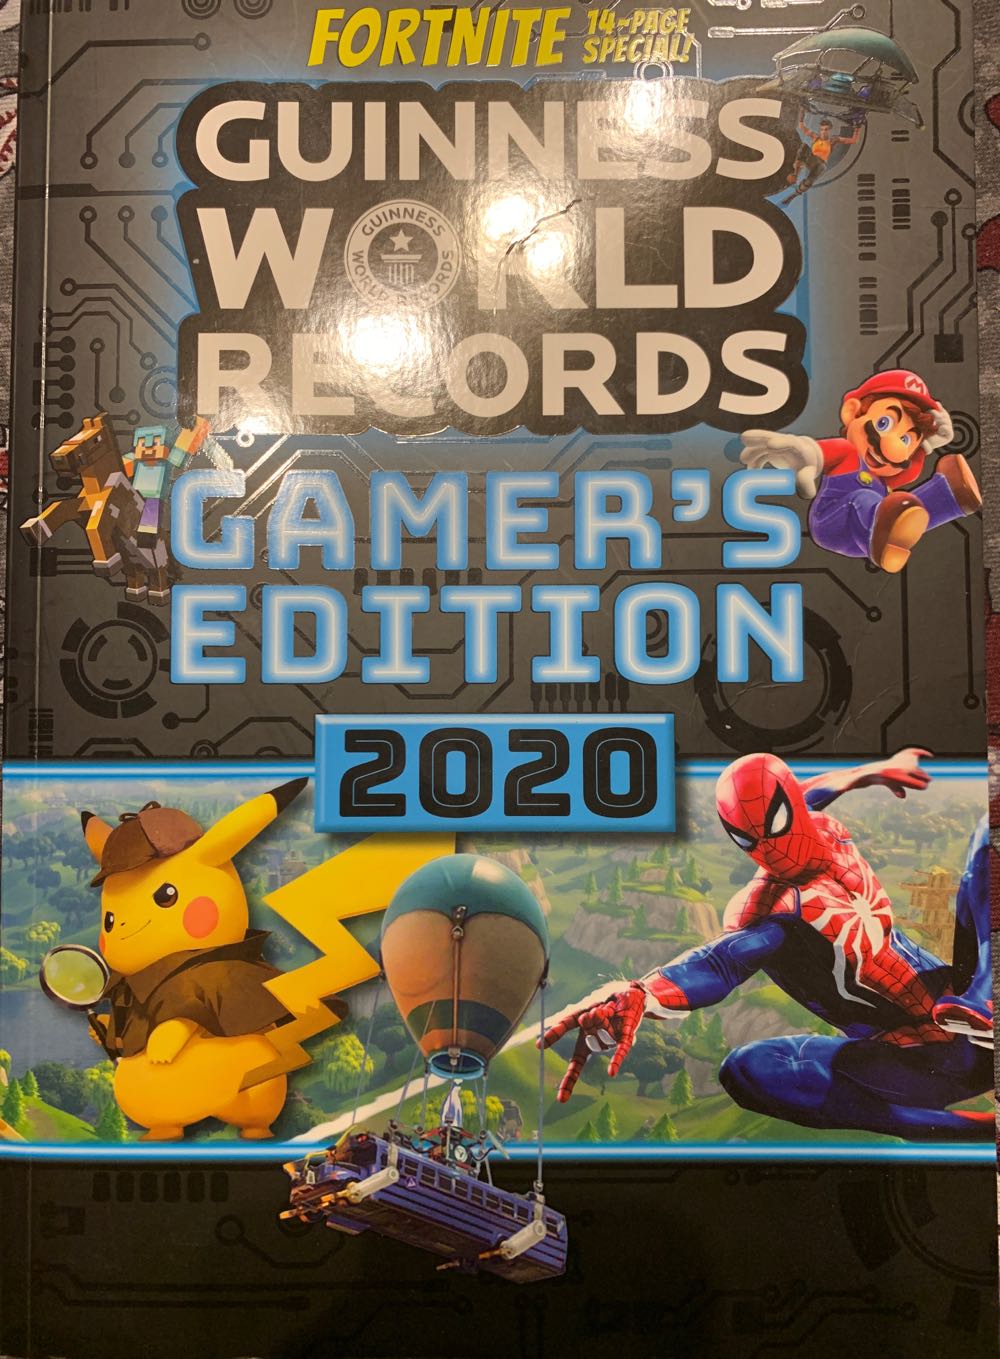 Guinness World Records: Gamer’s Edition 2020 - GUINNESS WORLD RECORDS (Guinness World Records) book collectible [Barcode 9781912286843] - Main Image 1